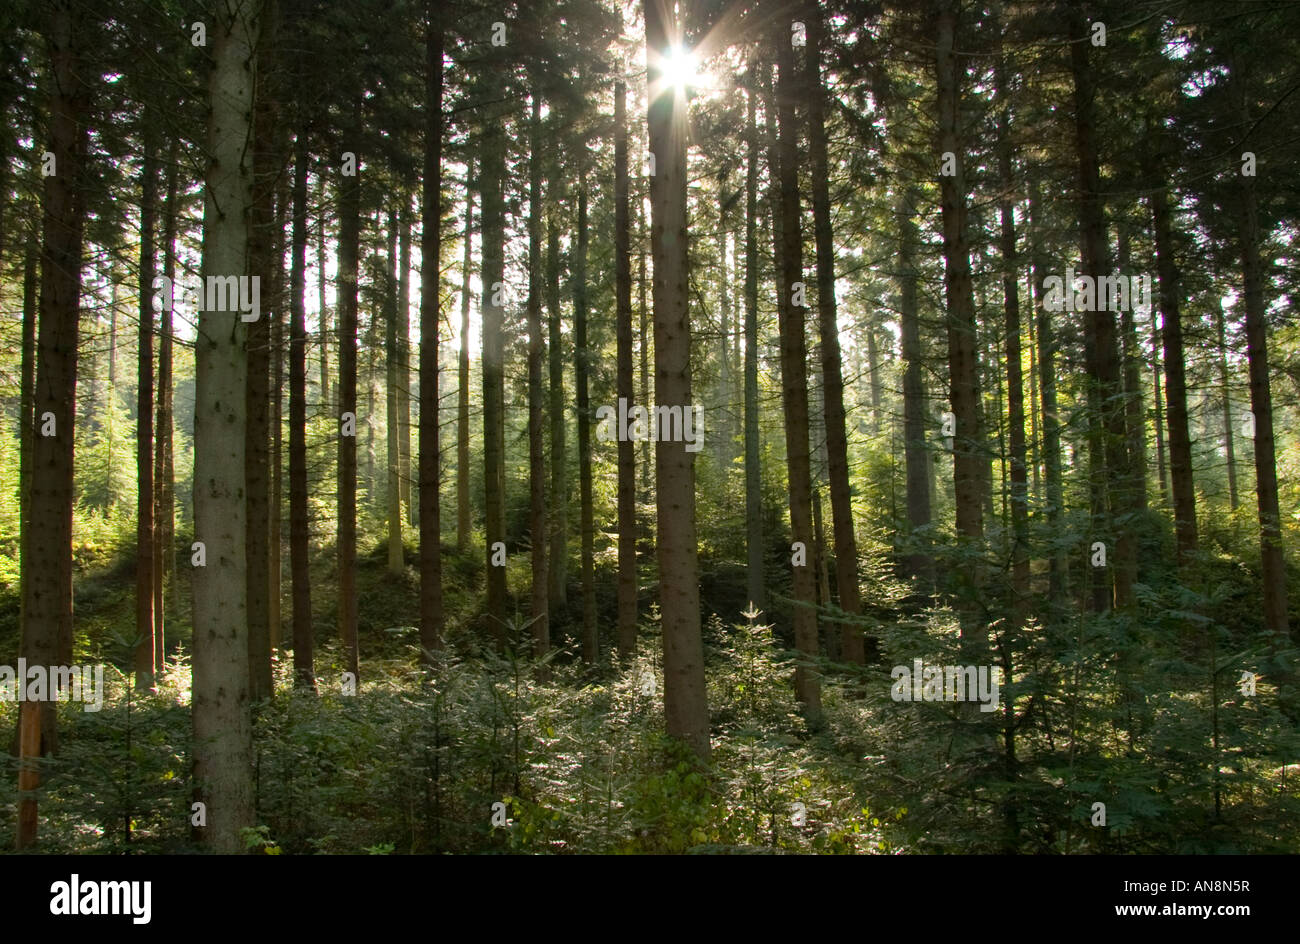 Beams of sunlight through the forest in Hamsterly, England Stock Photo